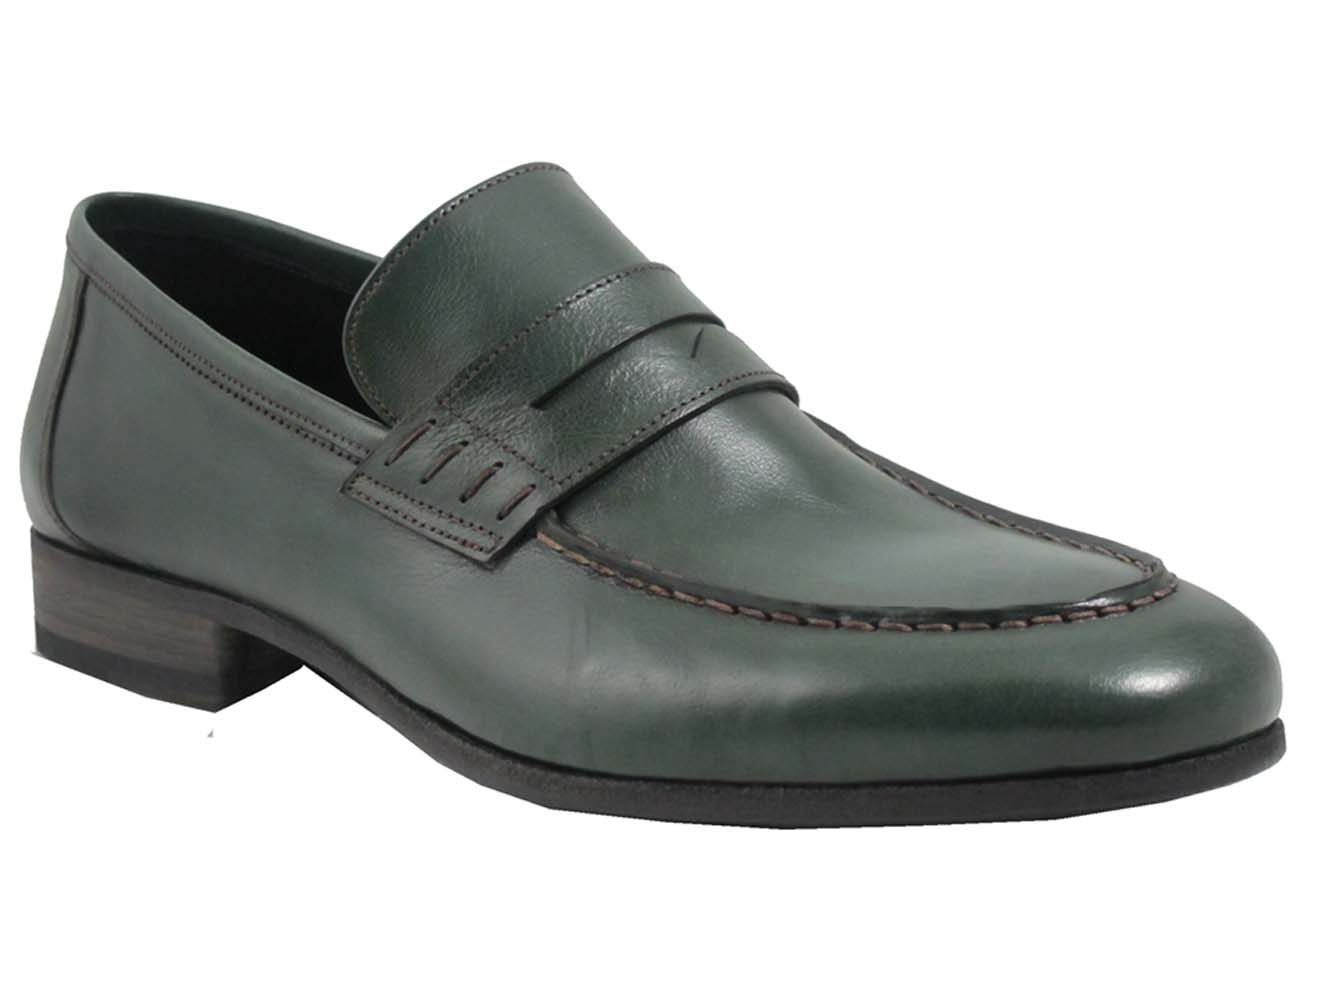 rossi-1876-loafers-shoes-green-main-2.jpg